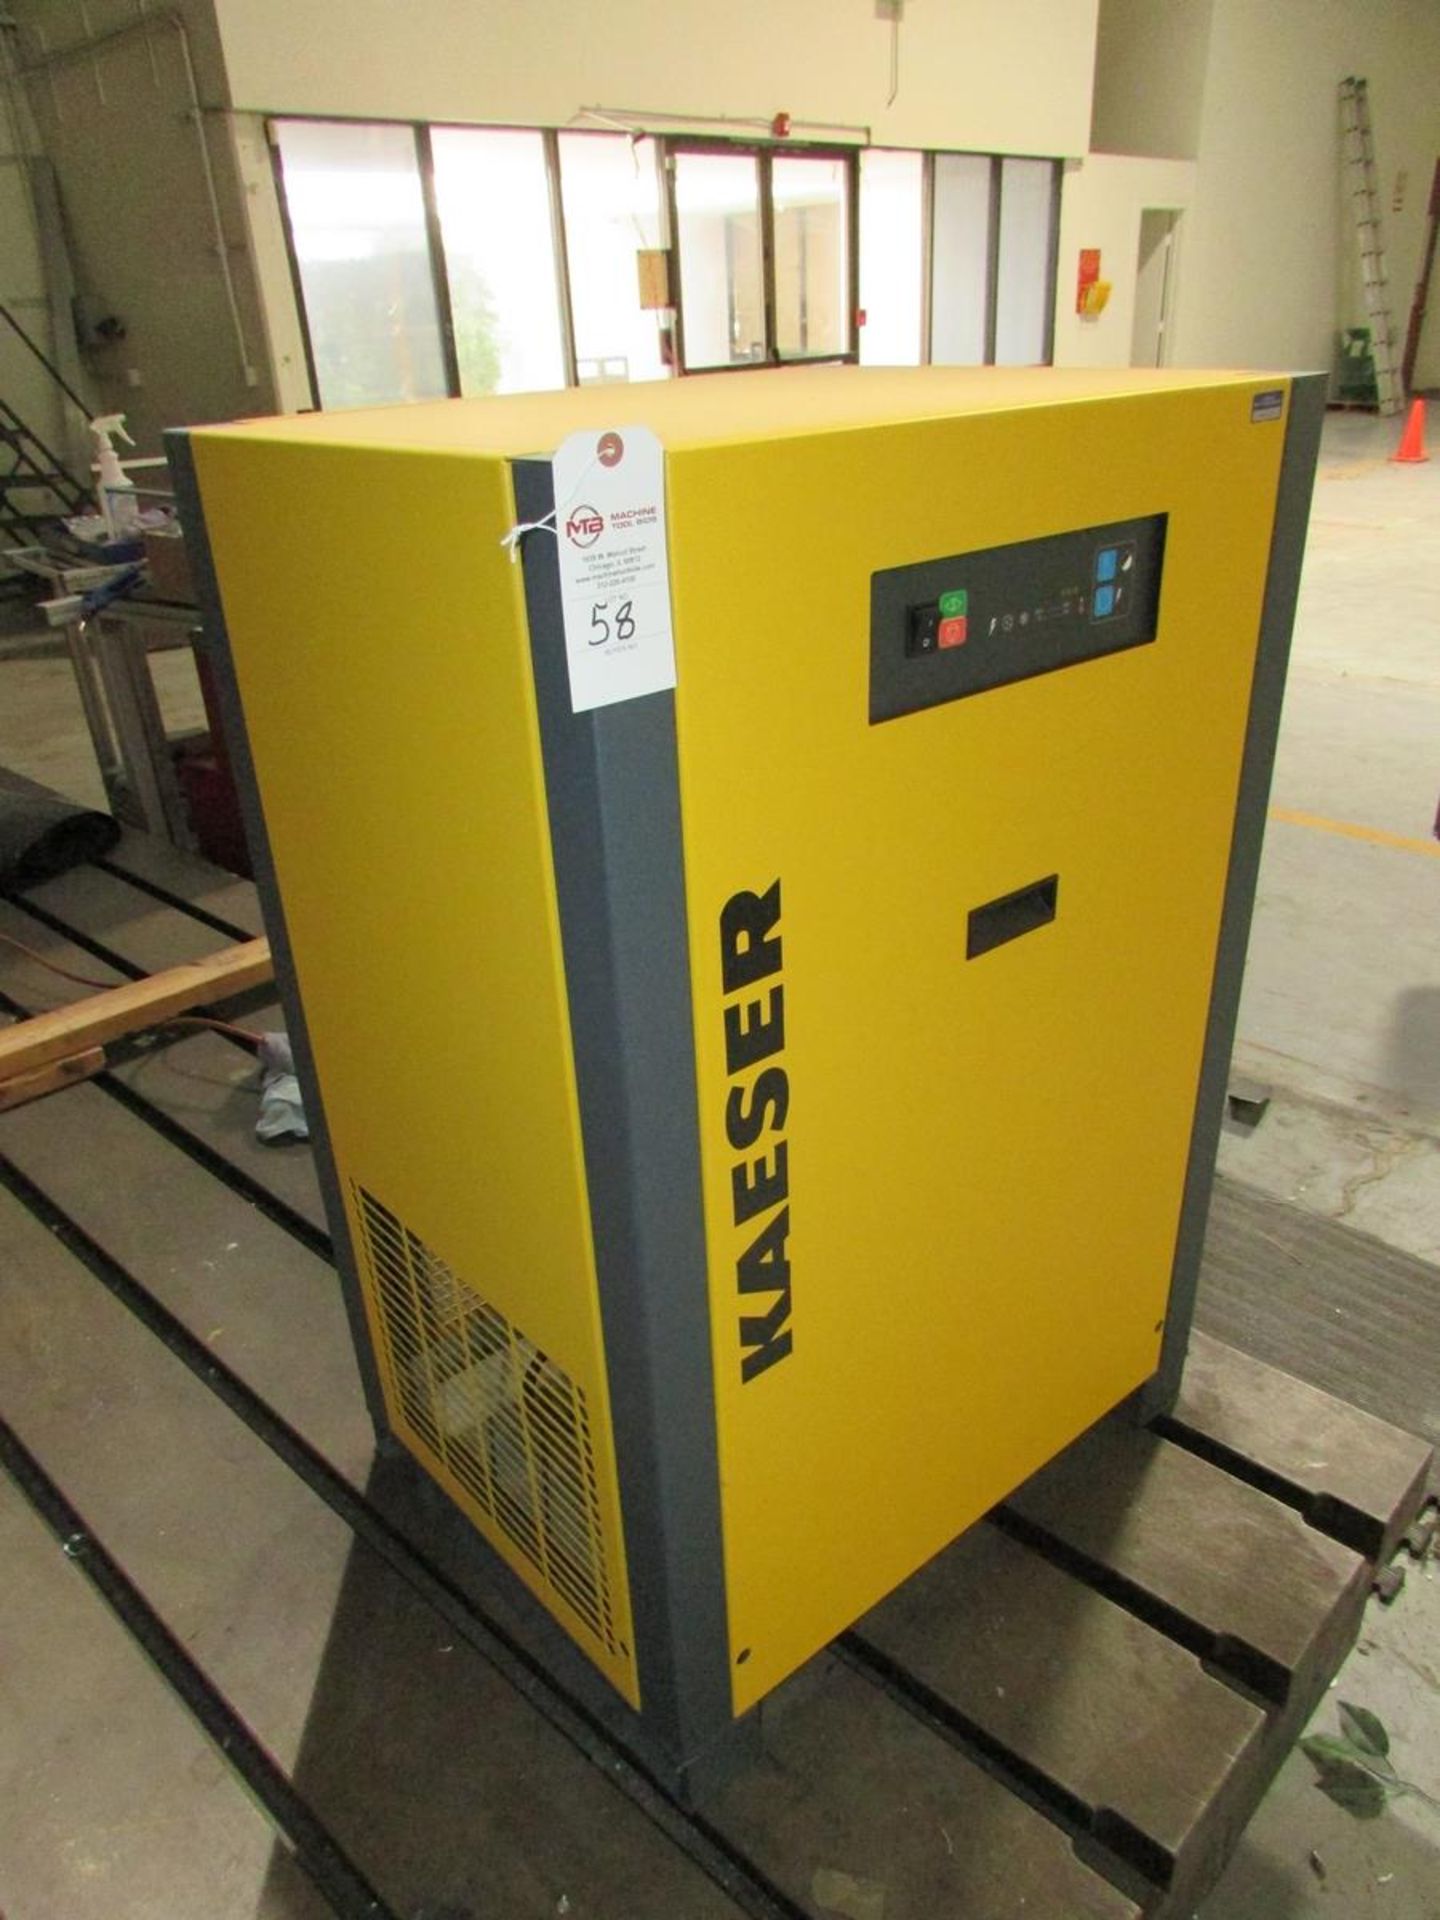 Kaeser aHT0.5-725 Refrigerated Compressed Air Dryer